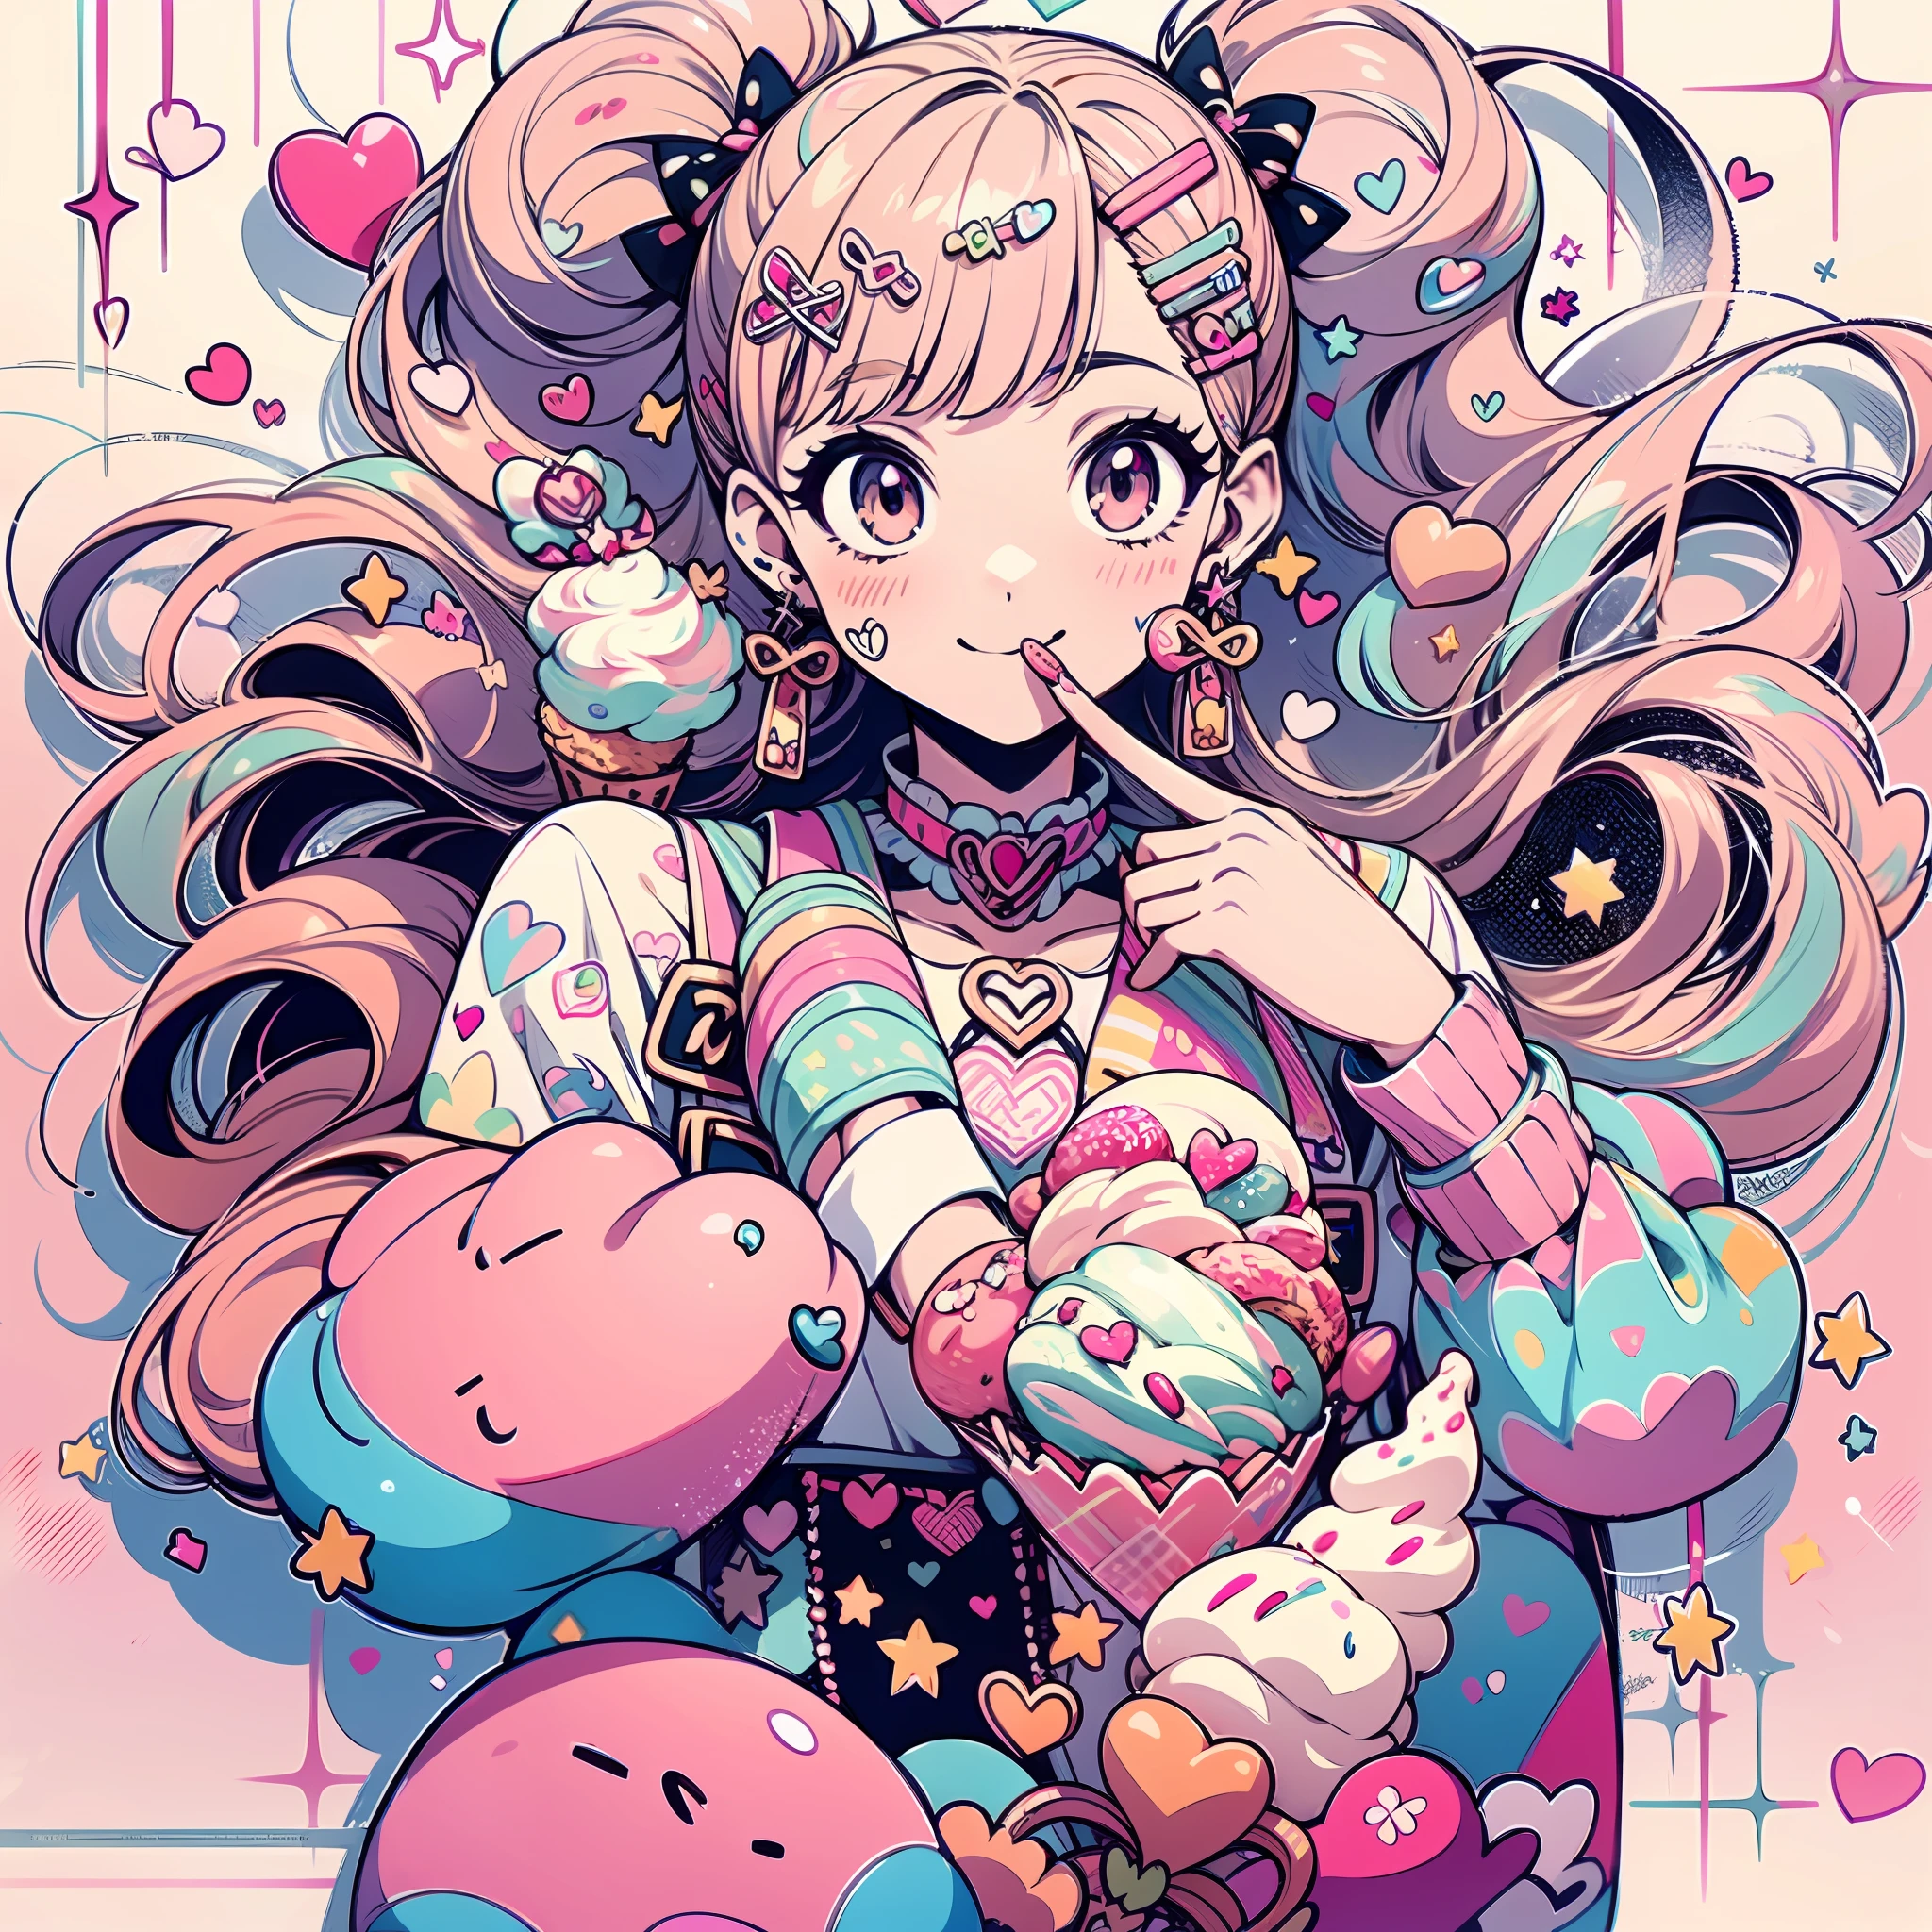 ((1girl)), halfbody, portrait, ice cream, napolitan flavor, ((color palette: brown, pink, vanilla off-white)), pretty, hearts, sparkles, star effects, bokeh, cute, happy, jumping floating, pattern background, ice cream shop, icecream car, 🍦🍨🍭, tasty trifecta of classic ice cream flavors, decora, hairclips, harajuku fashion outfit, harajuku